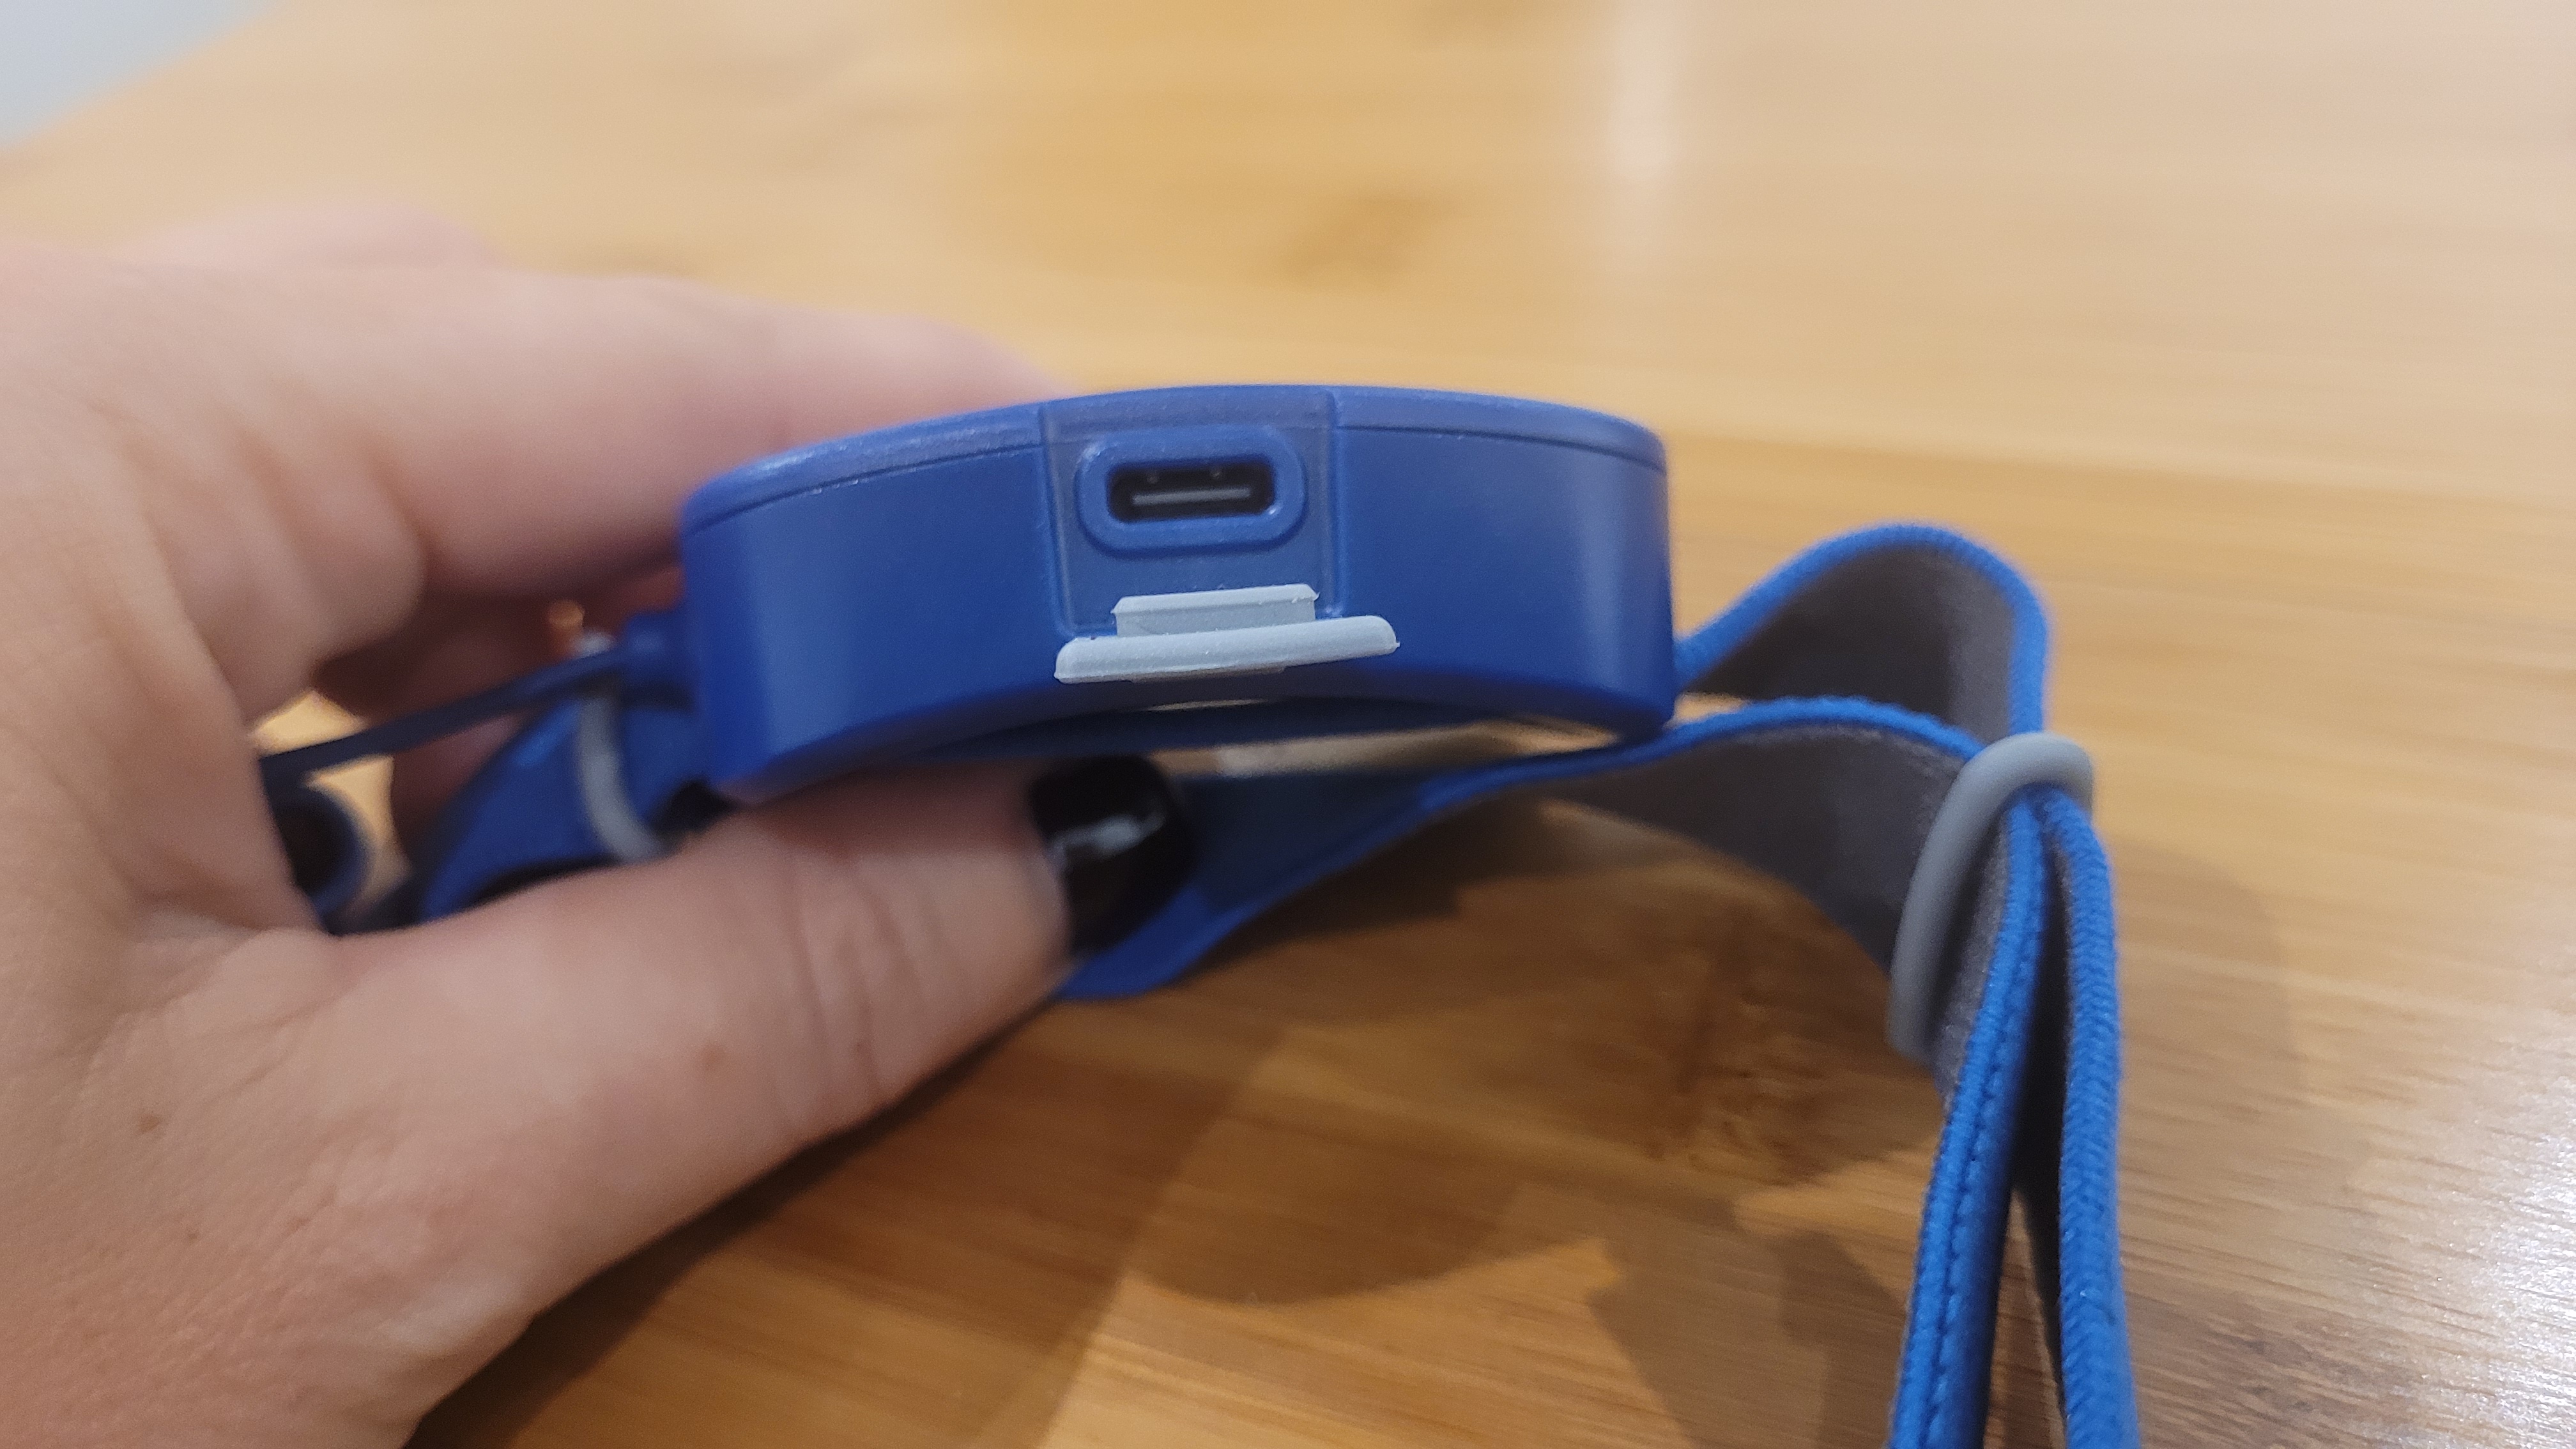 Biolite 425 headlamp in the hand showing the USB-C connection